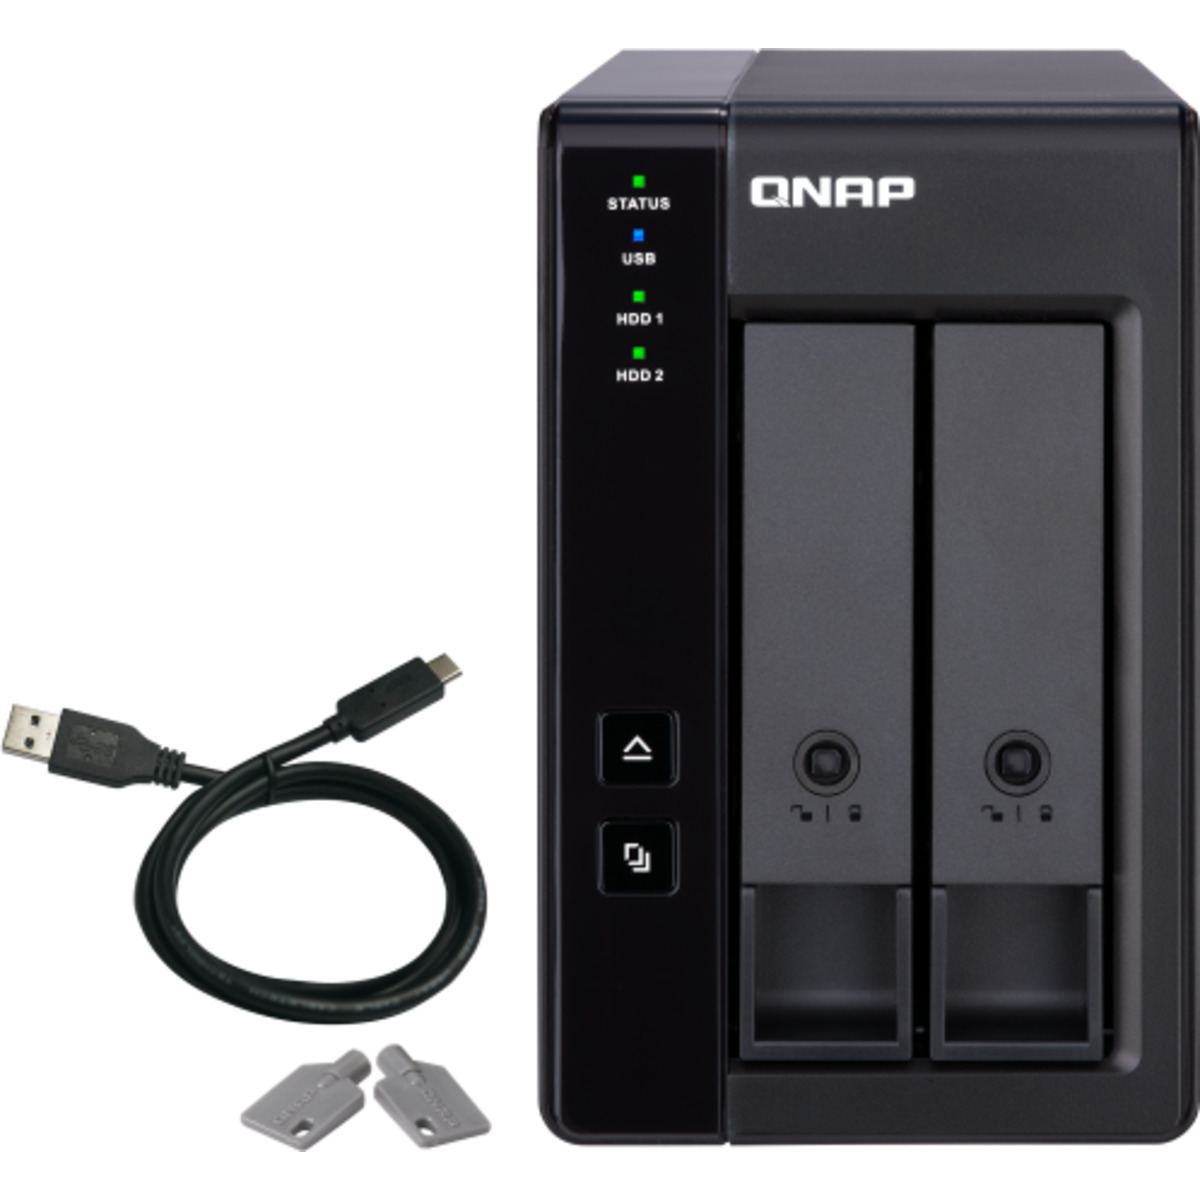 QNAP TR-002 External Expansion Drive 2tb 2-Bay Desktop Multimedia / Power User / Business Expansion Enclosure 1x2tb Western Digital Red SA500 WDS200T1R0A 2.5 560/530MB/s SATA 6Gb/s SSD NAS Class Drives Installed - Burn-In Tested TR-002 External Expansion Drive